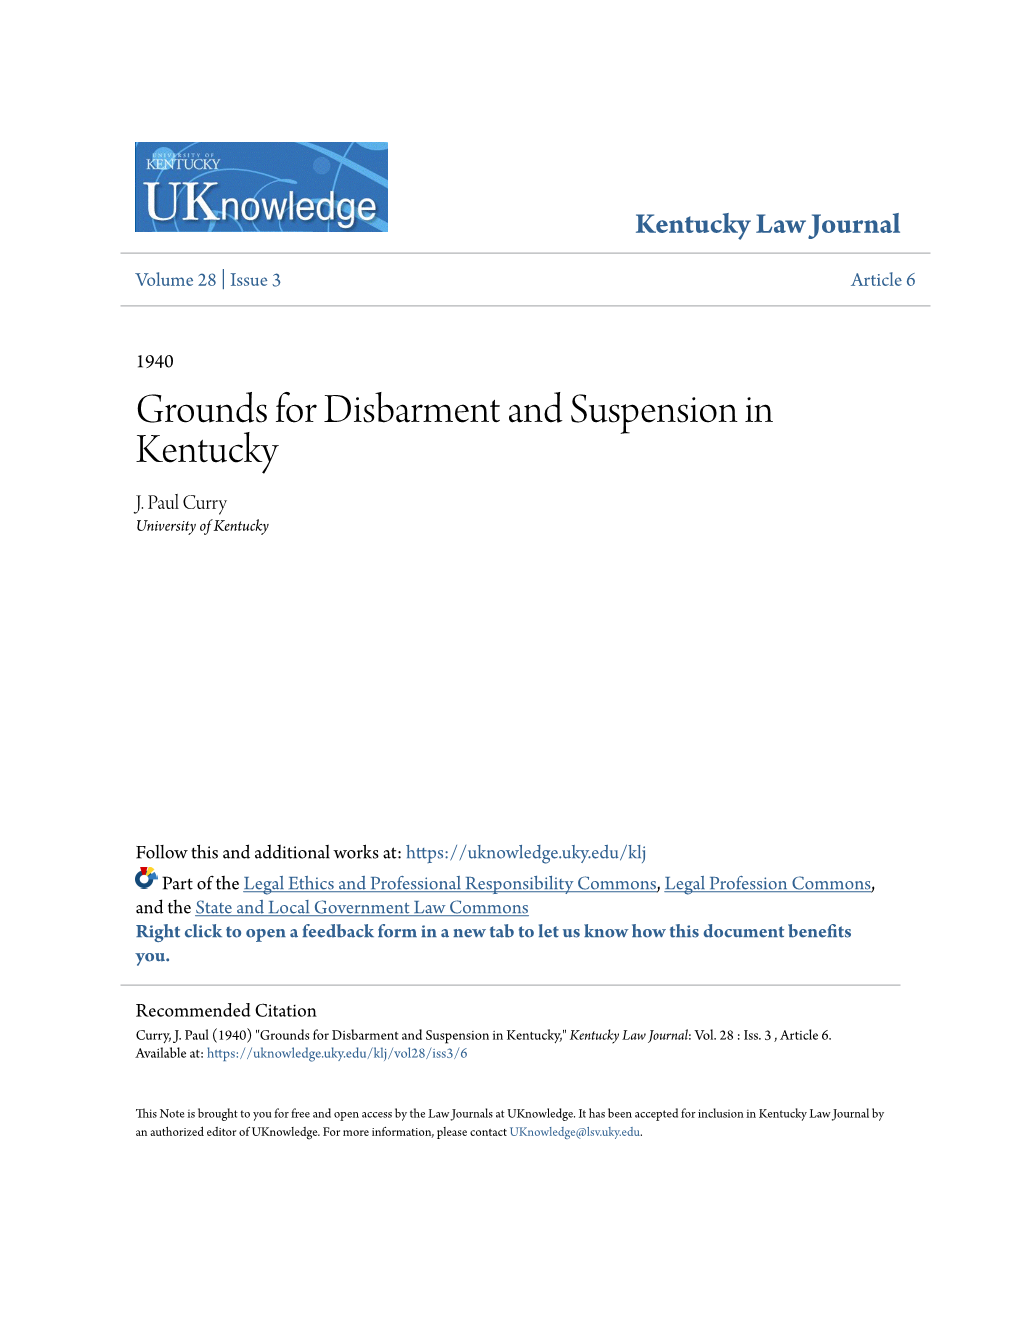 Grounds for Disbarment and Suspension in Kentucky J